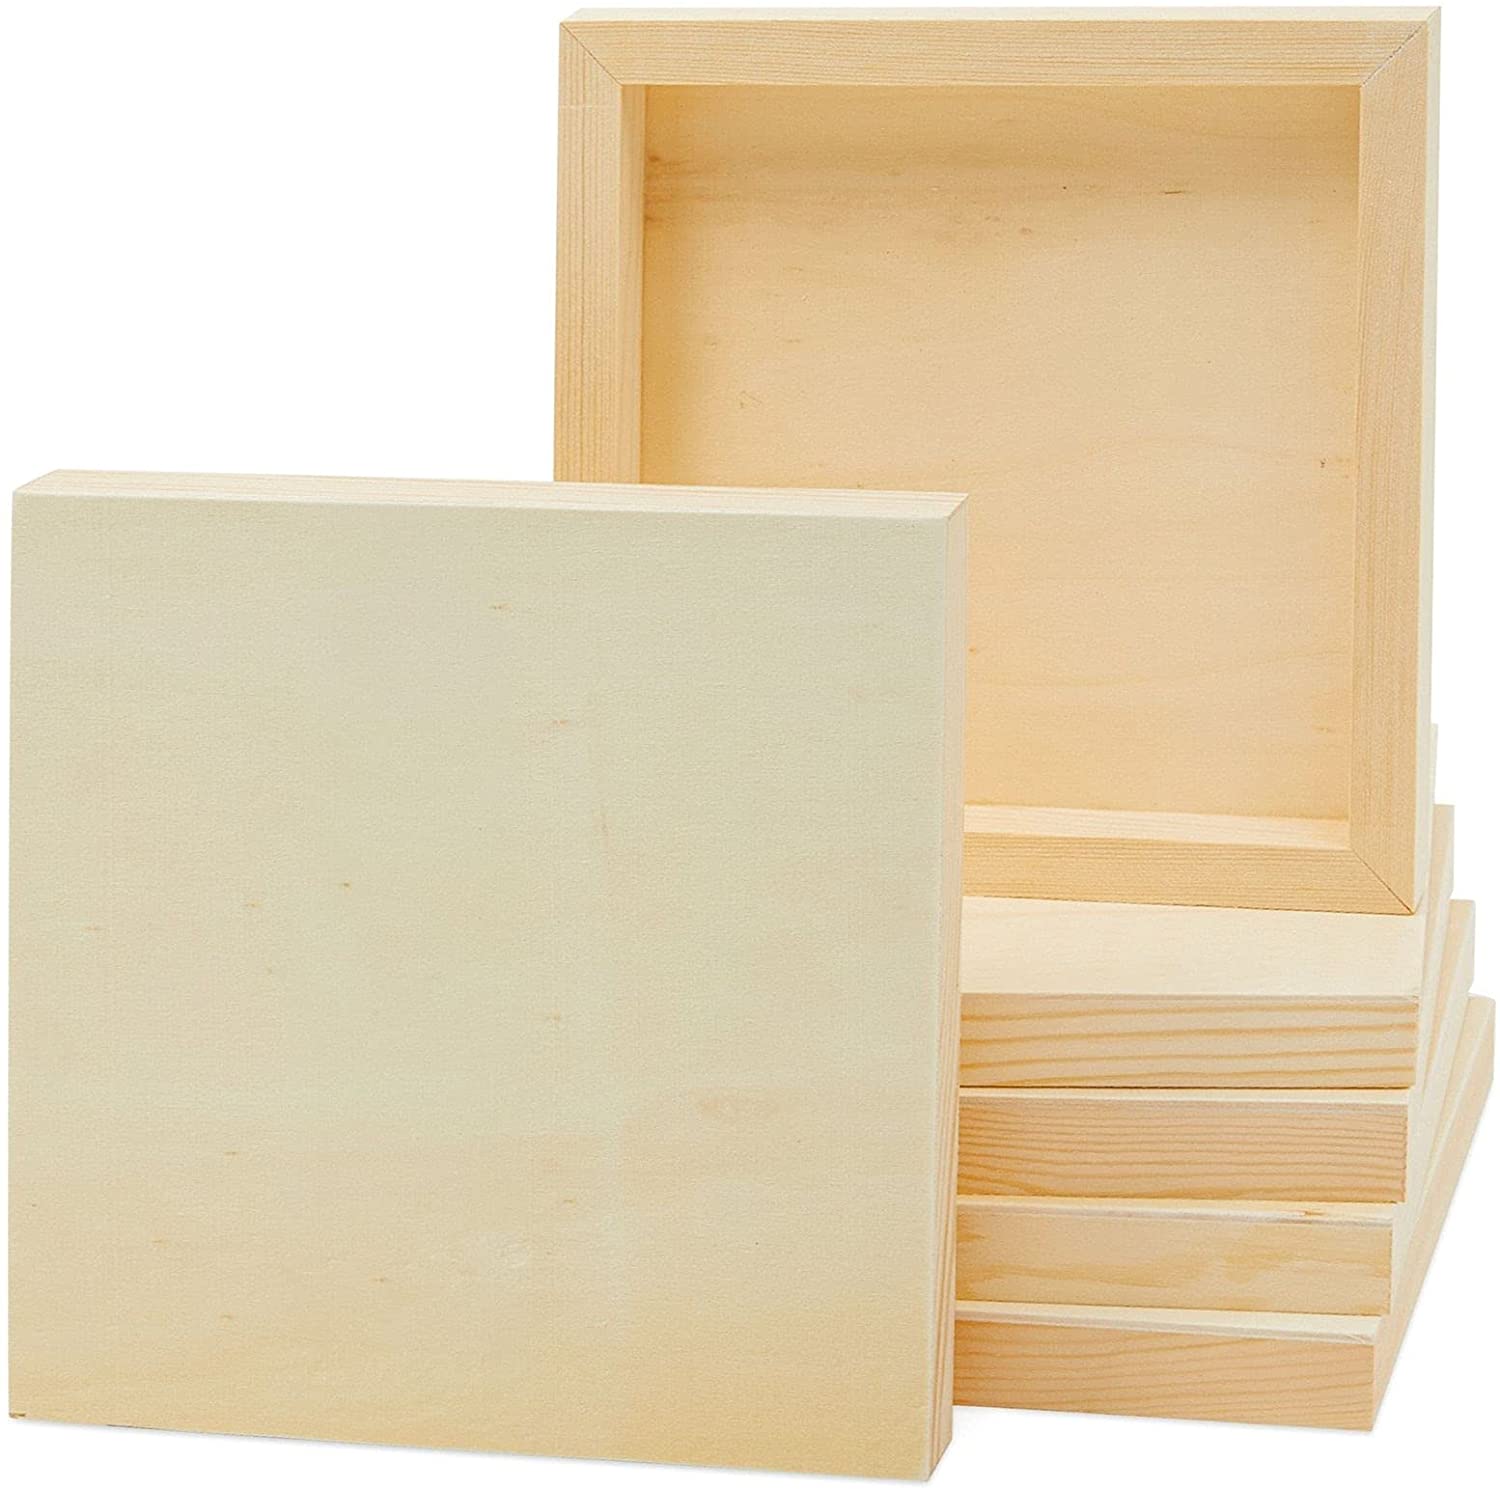 Juvale 8x8 Wood Panel Boards